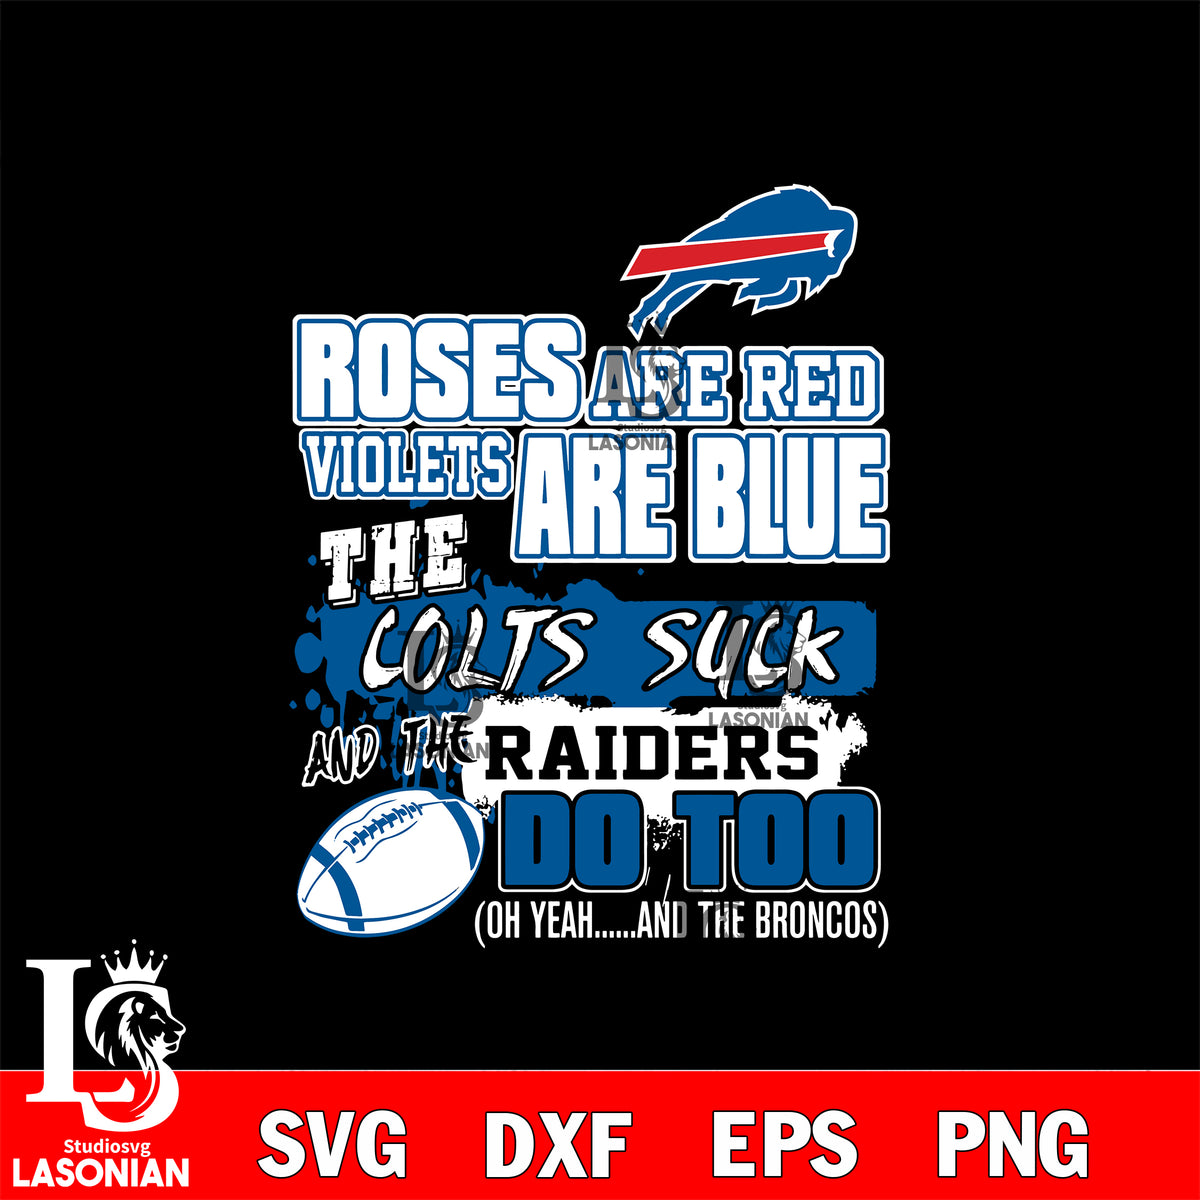 The colts suck and the raiders do too Buffalo Bills svg ,eps,dxf,png f –  lasoniansvg